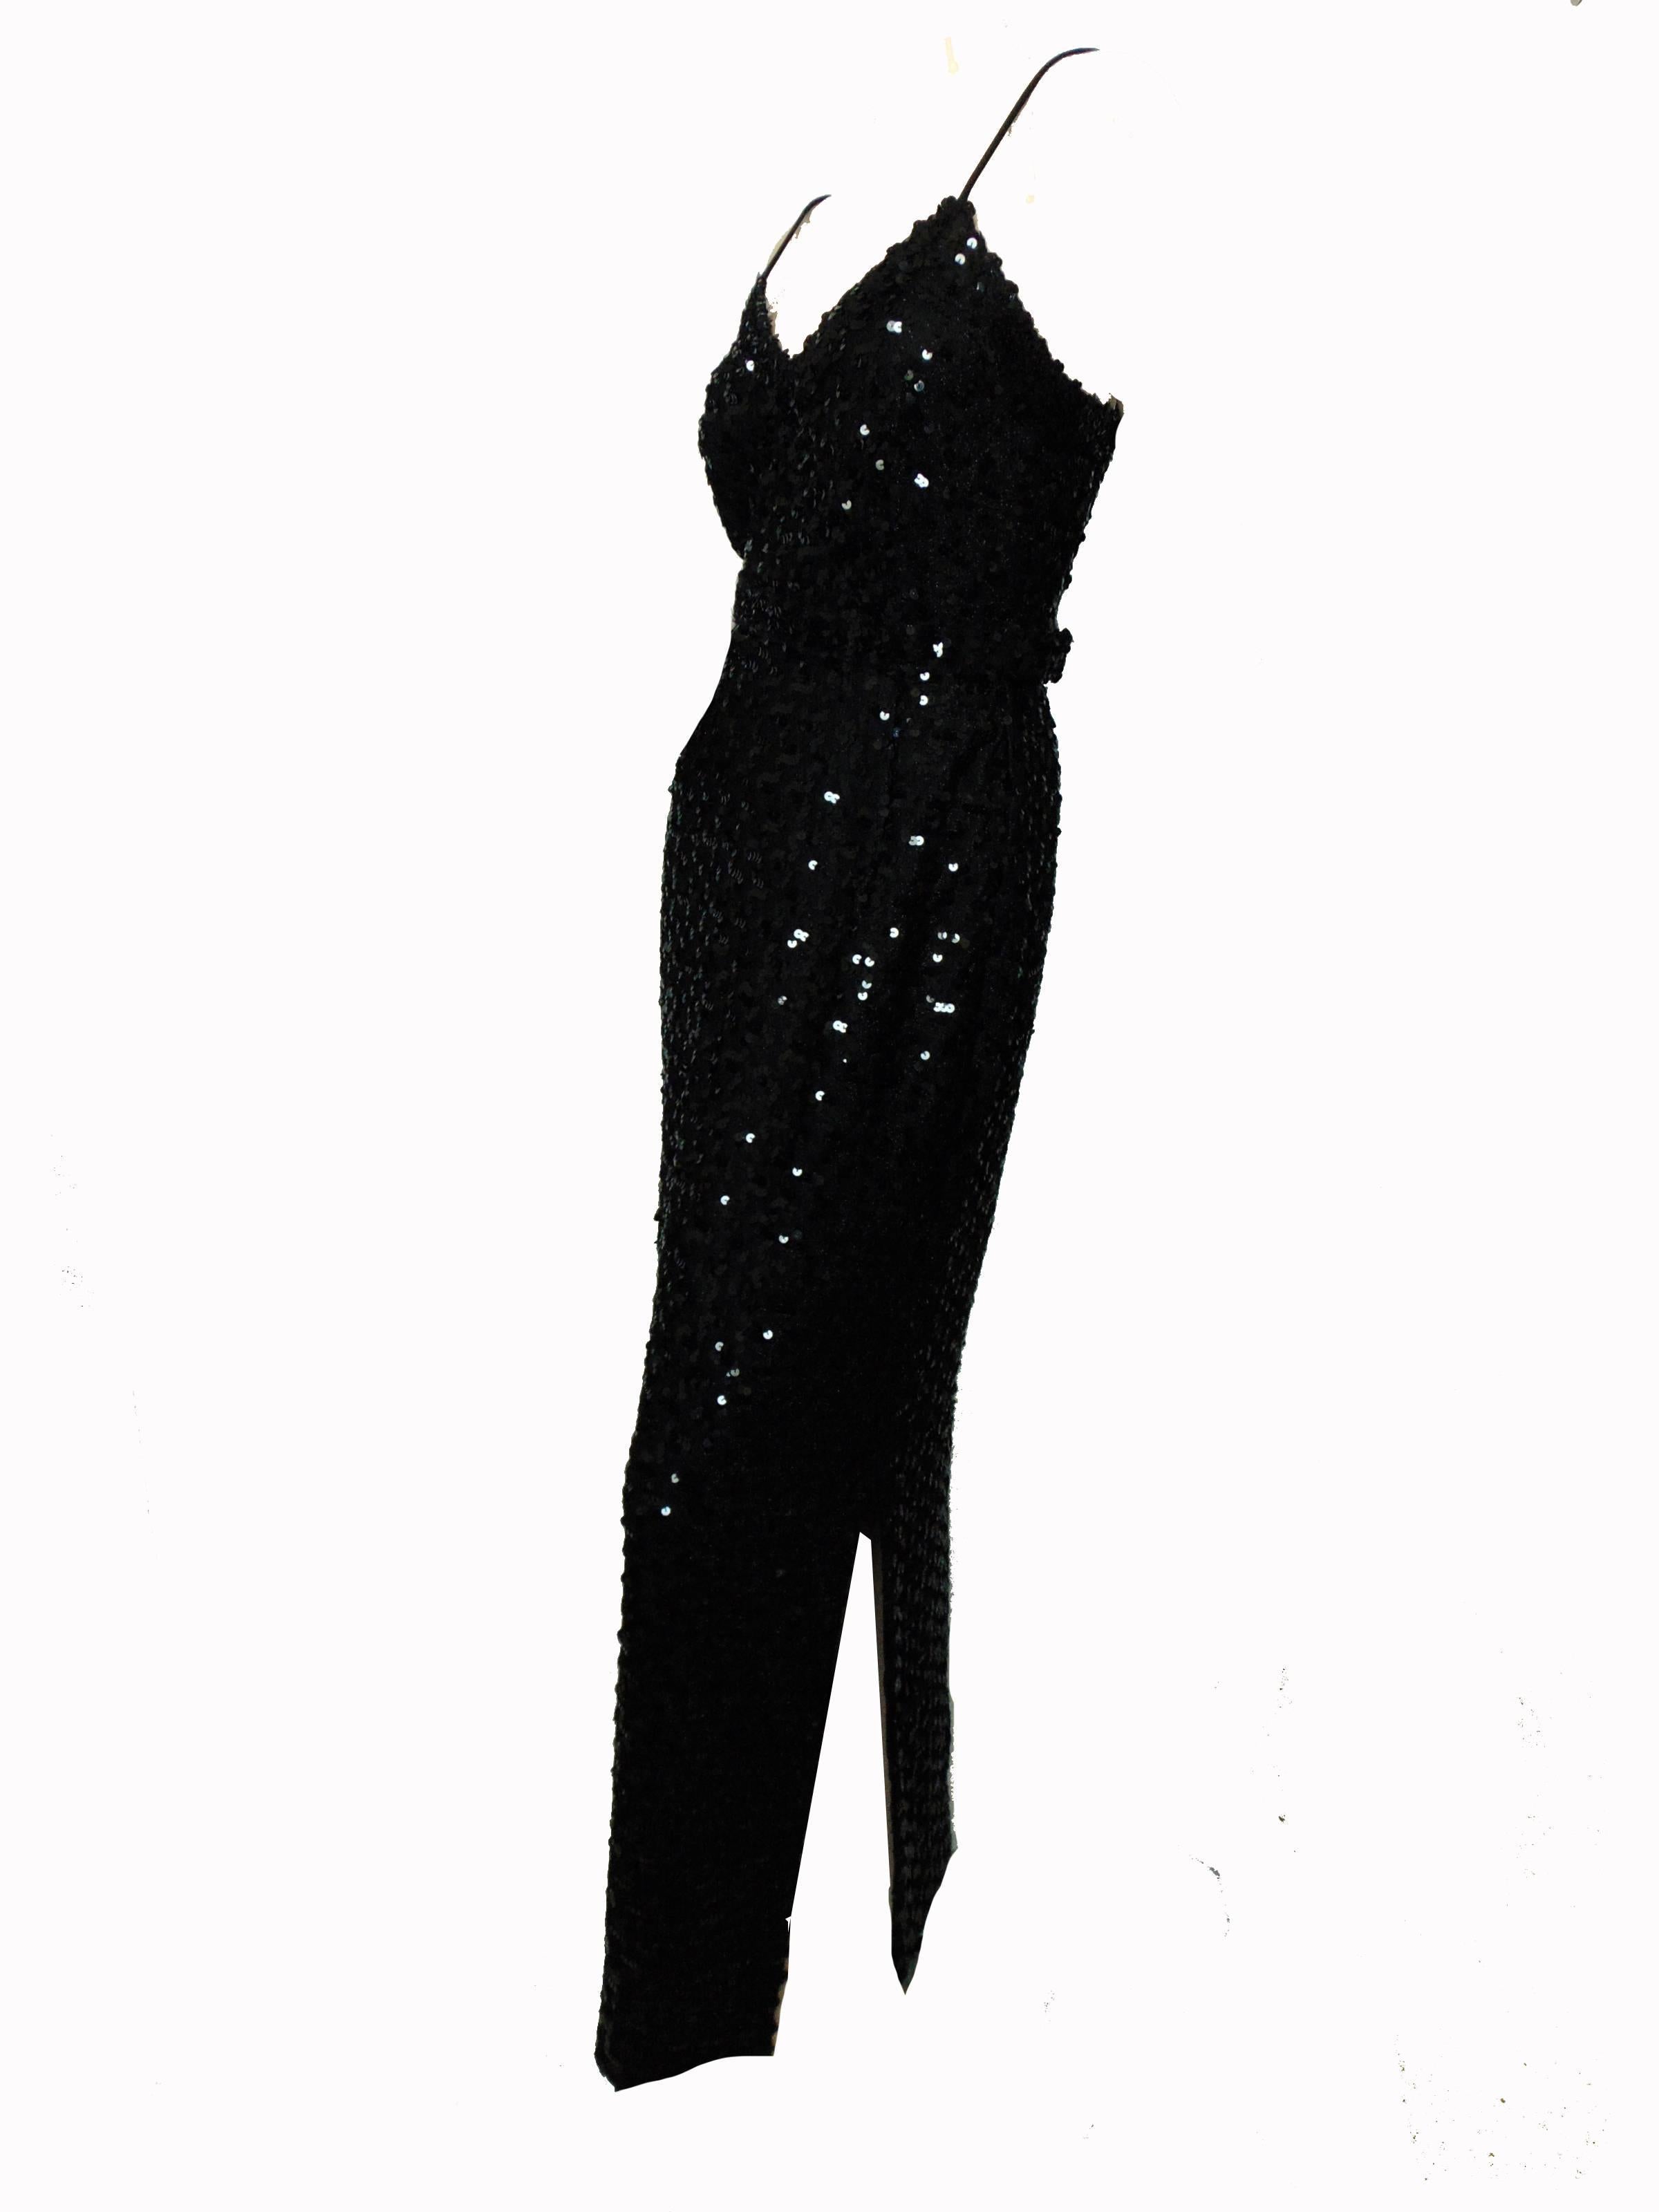 Here's a simple yet sexy evening gown by Lilli Diamond California, likely made in the 1970s.  Made from a stretchy knit fabric with tons of black sequins, this dress is cut to show off one's curves and features a side vent on the left side of the